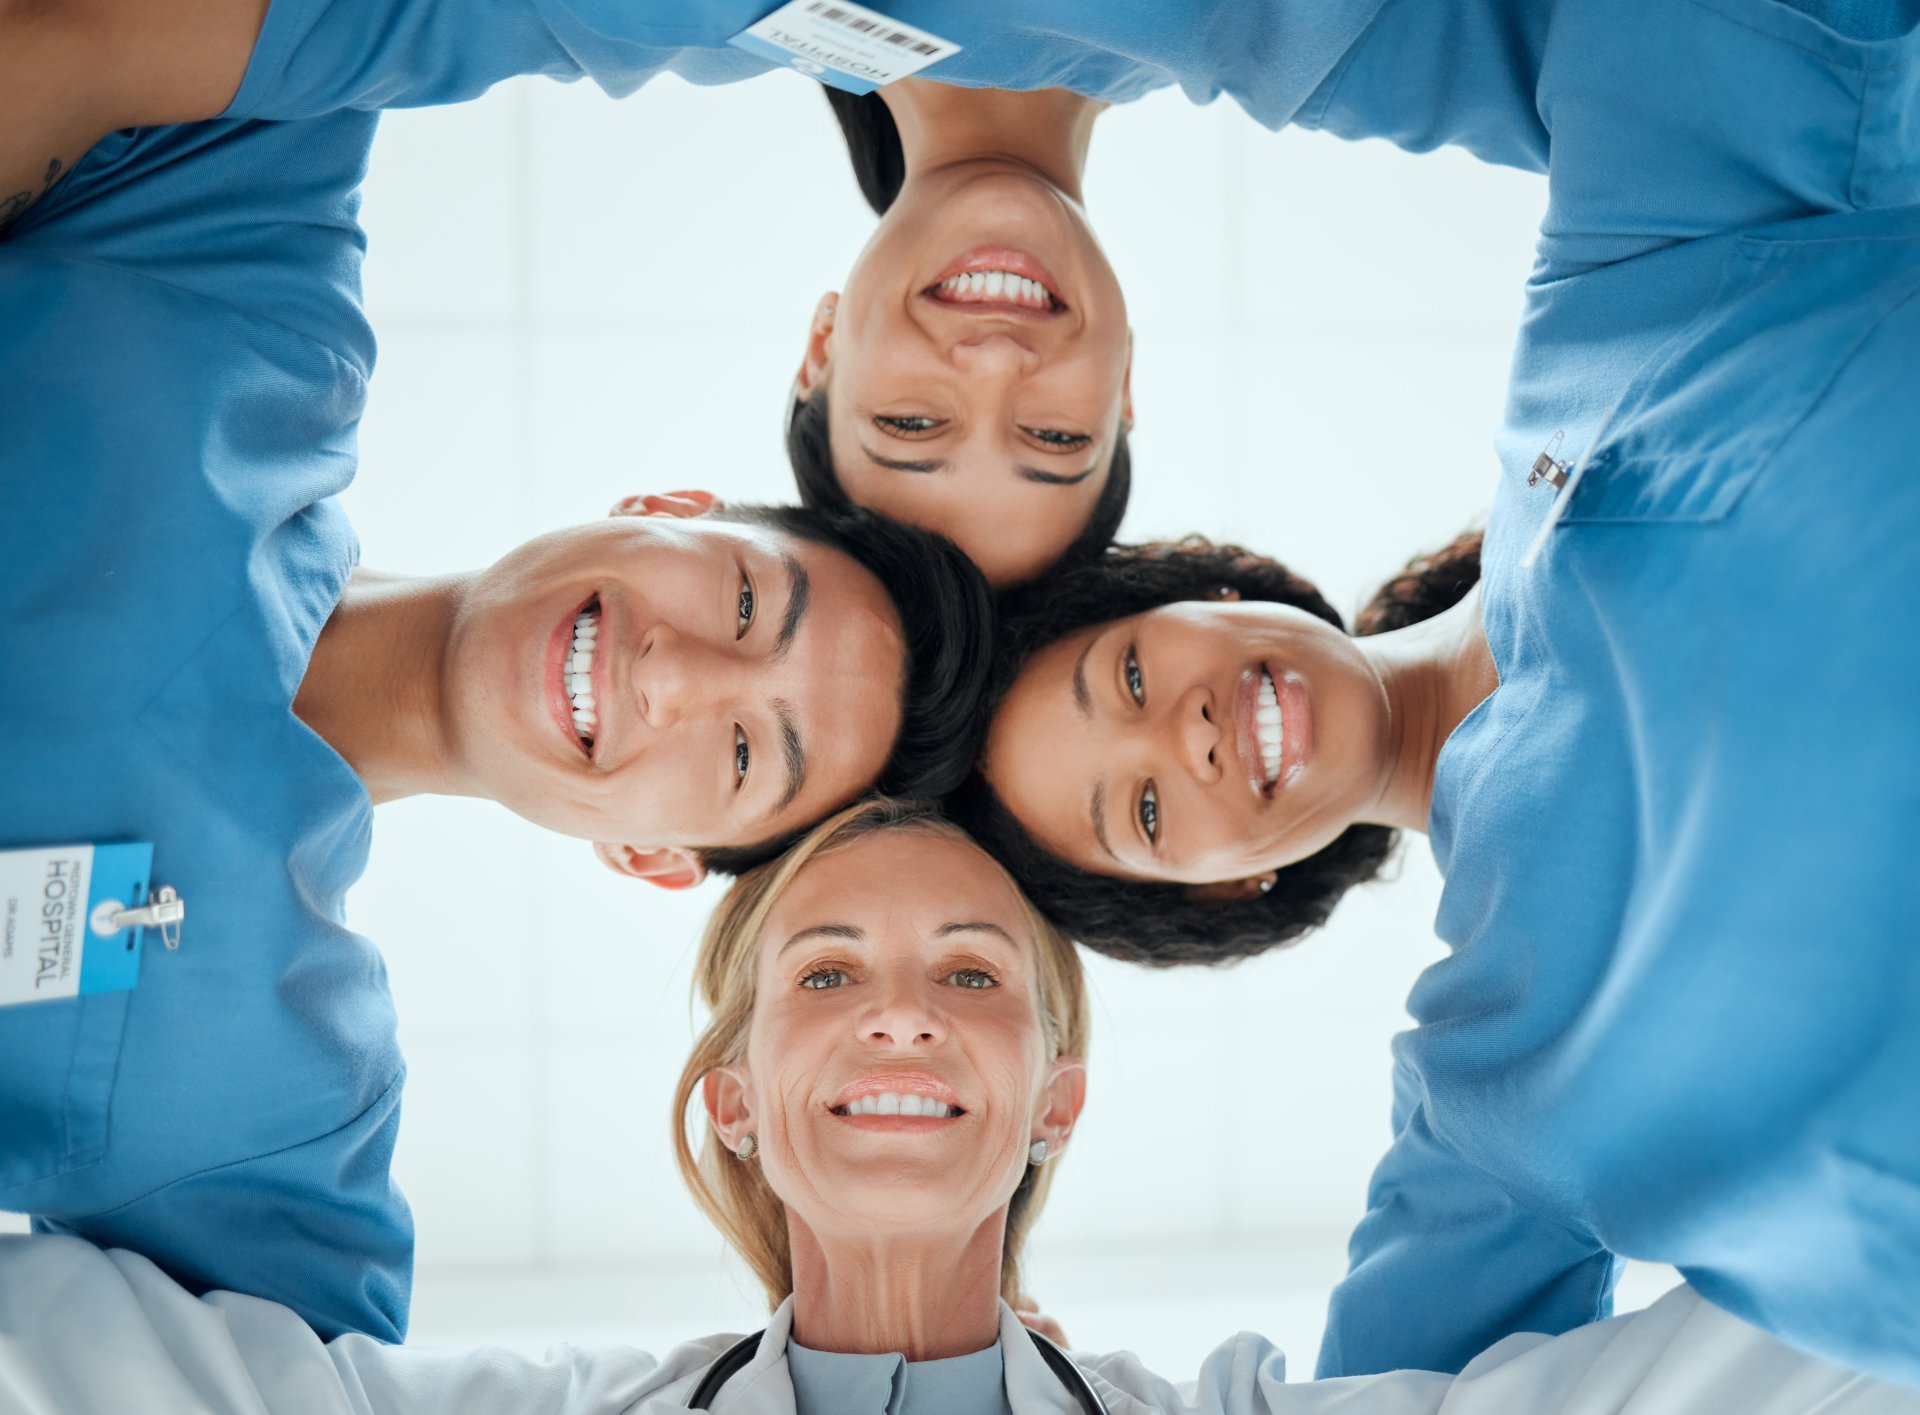 Four smiling healthcare workers huddle with their heads together.